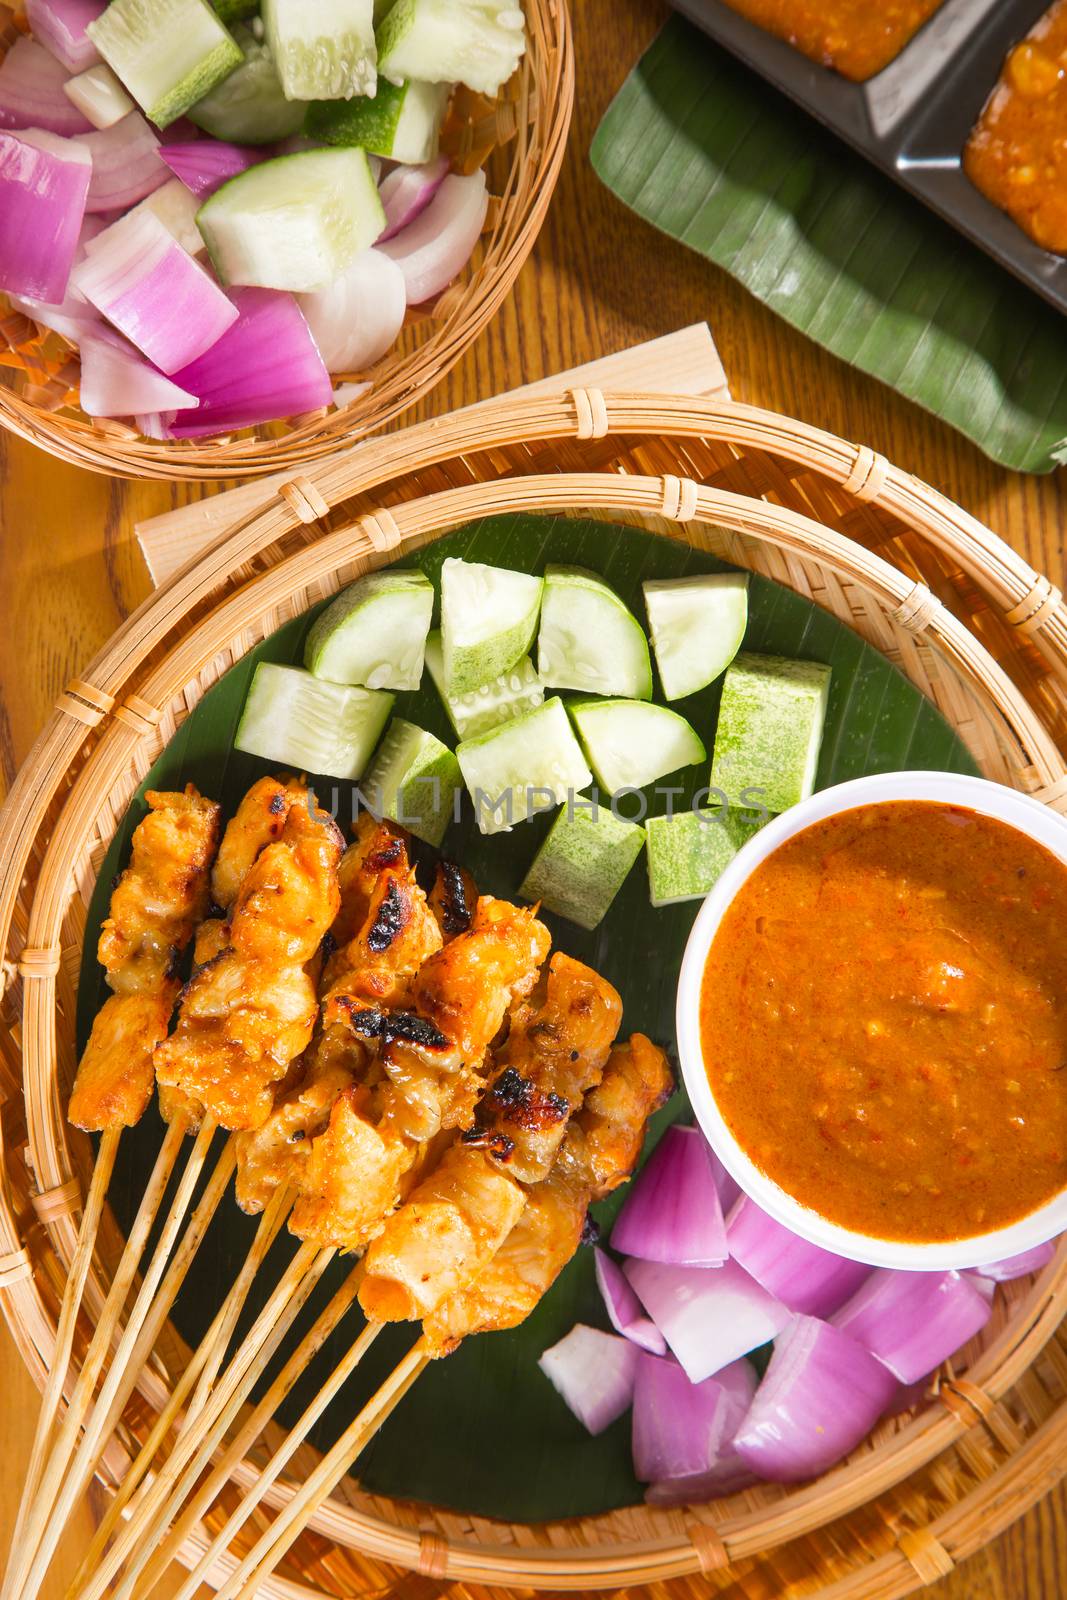 Chicken sate with delicious peanut sauce, ketupat, onion and cuc by tehcheesiong